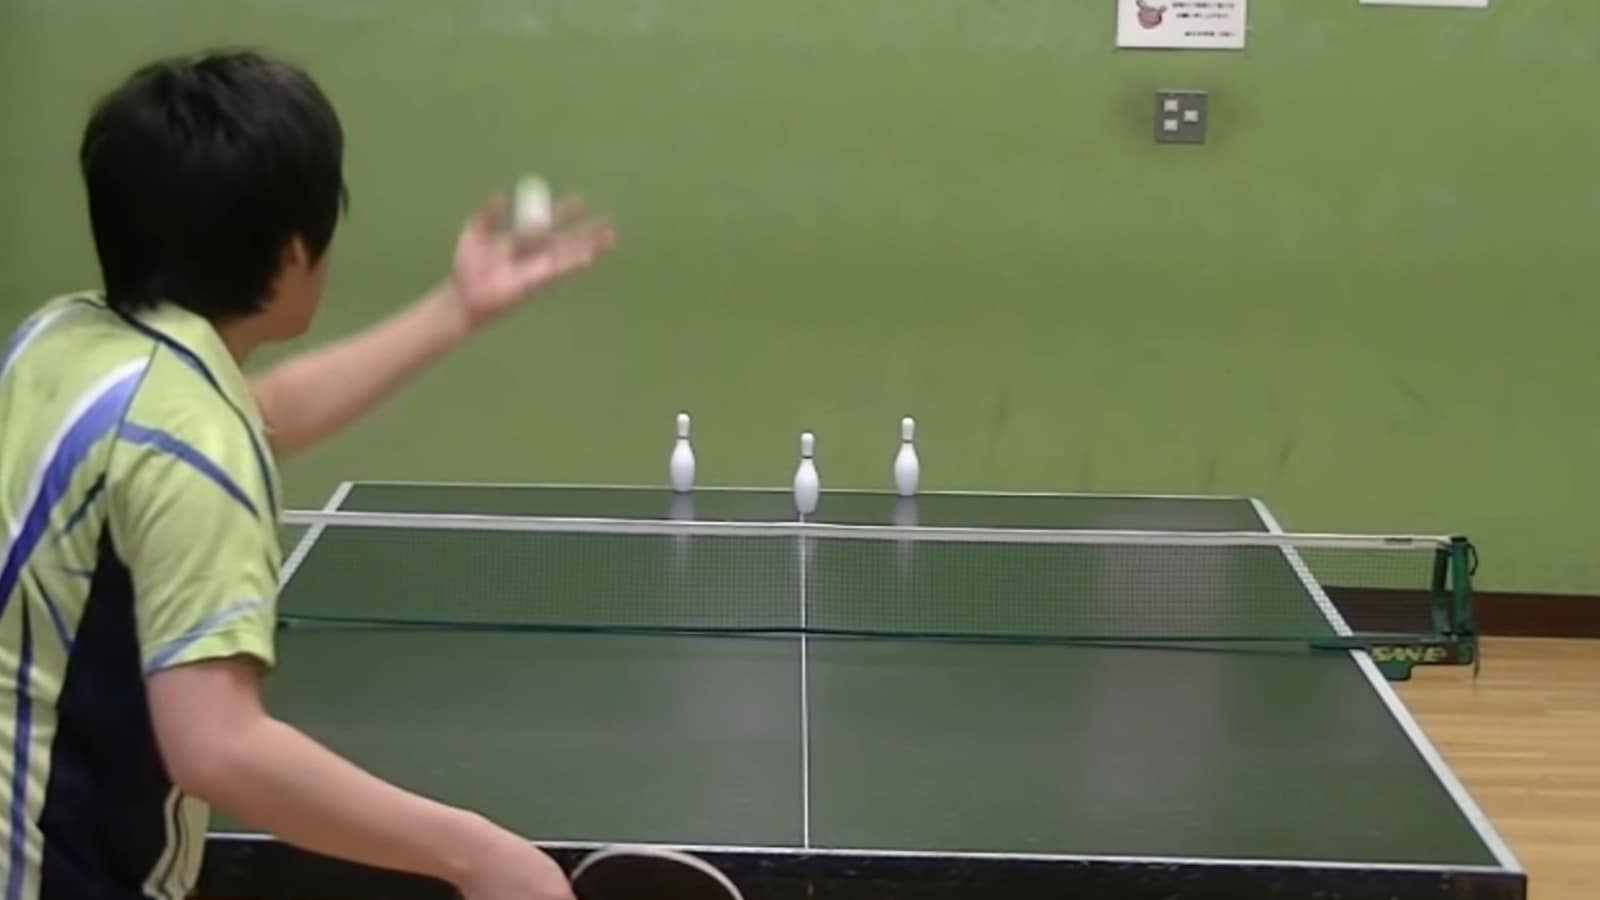 Mans bowling skill with ping pong balls wins over Internet